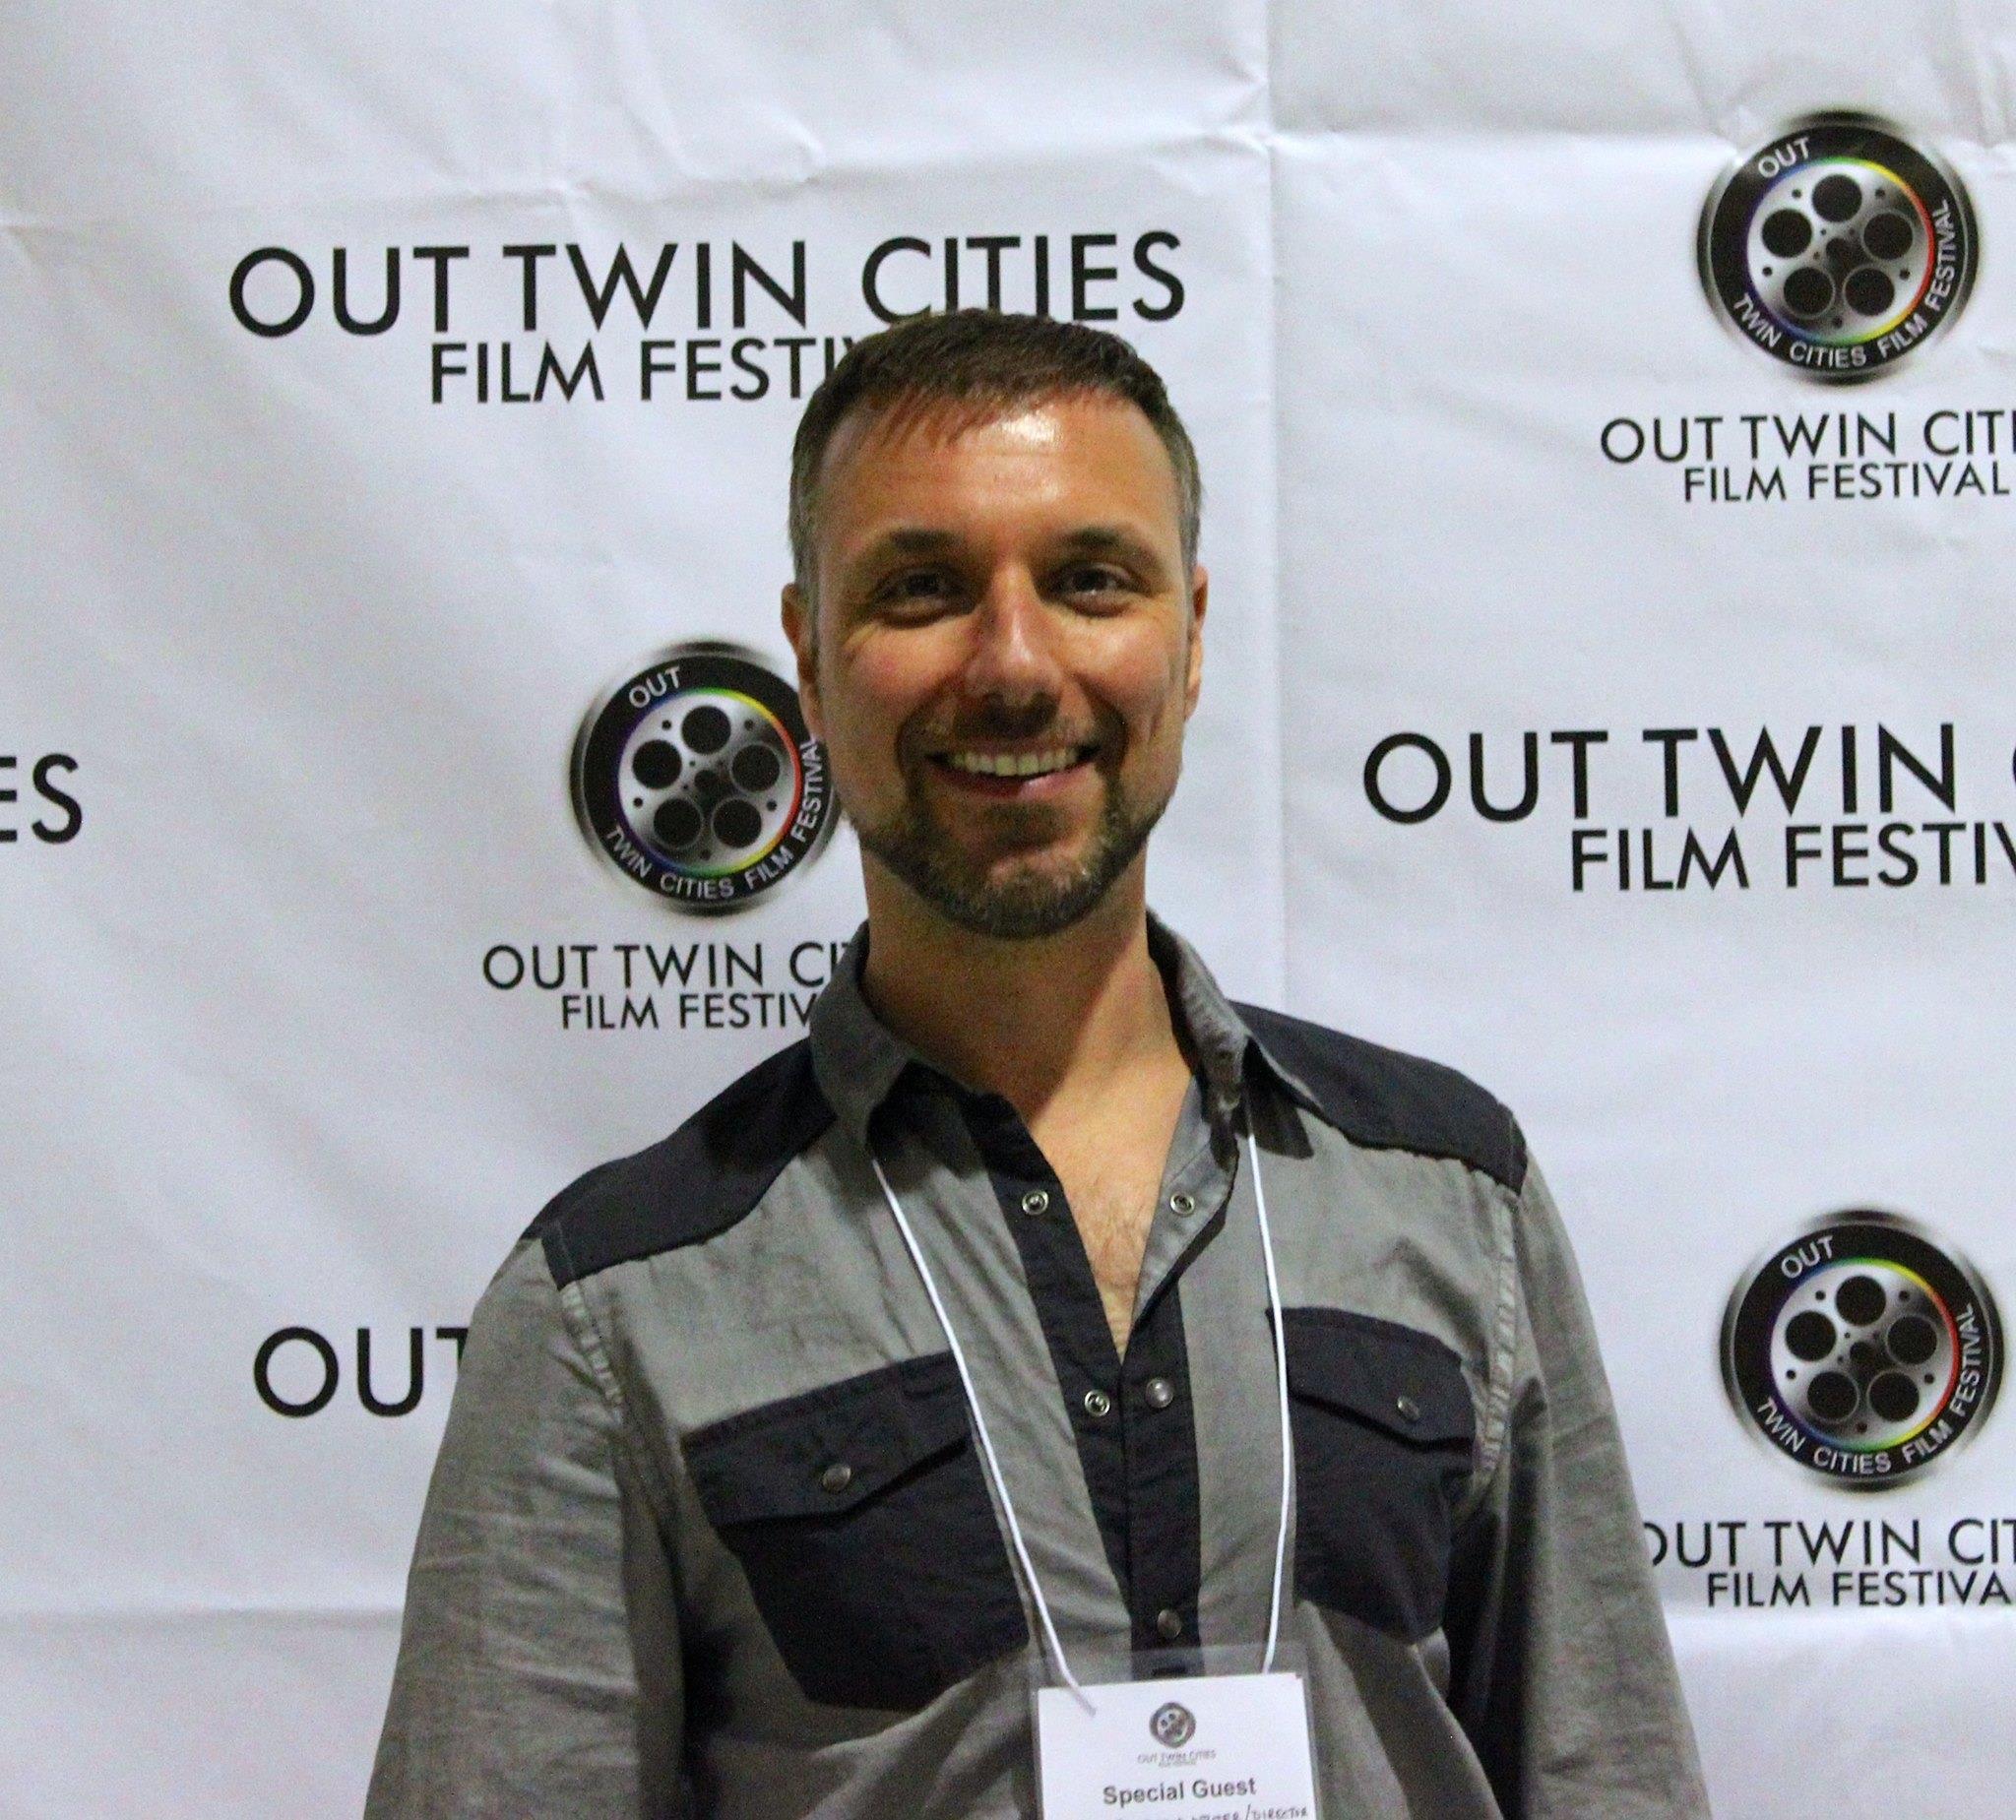 Out Twin Cities Film Festival 2014 representing 